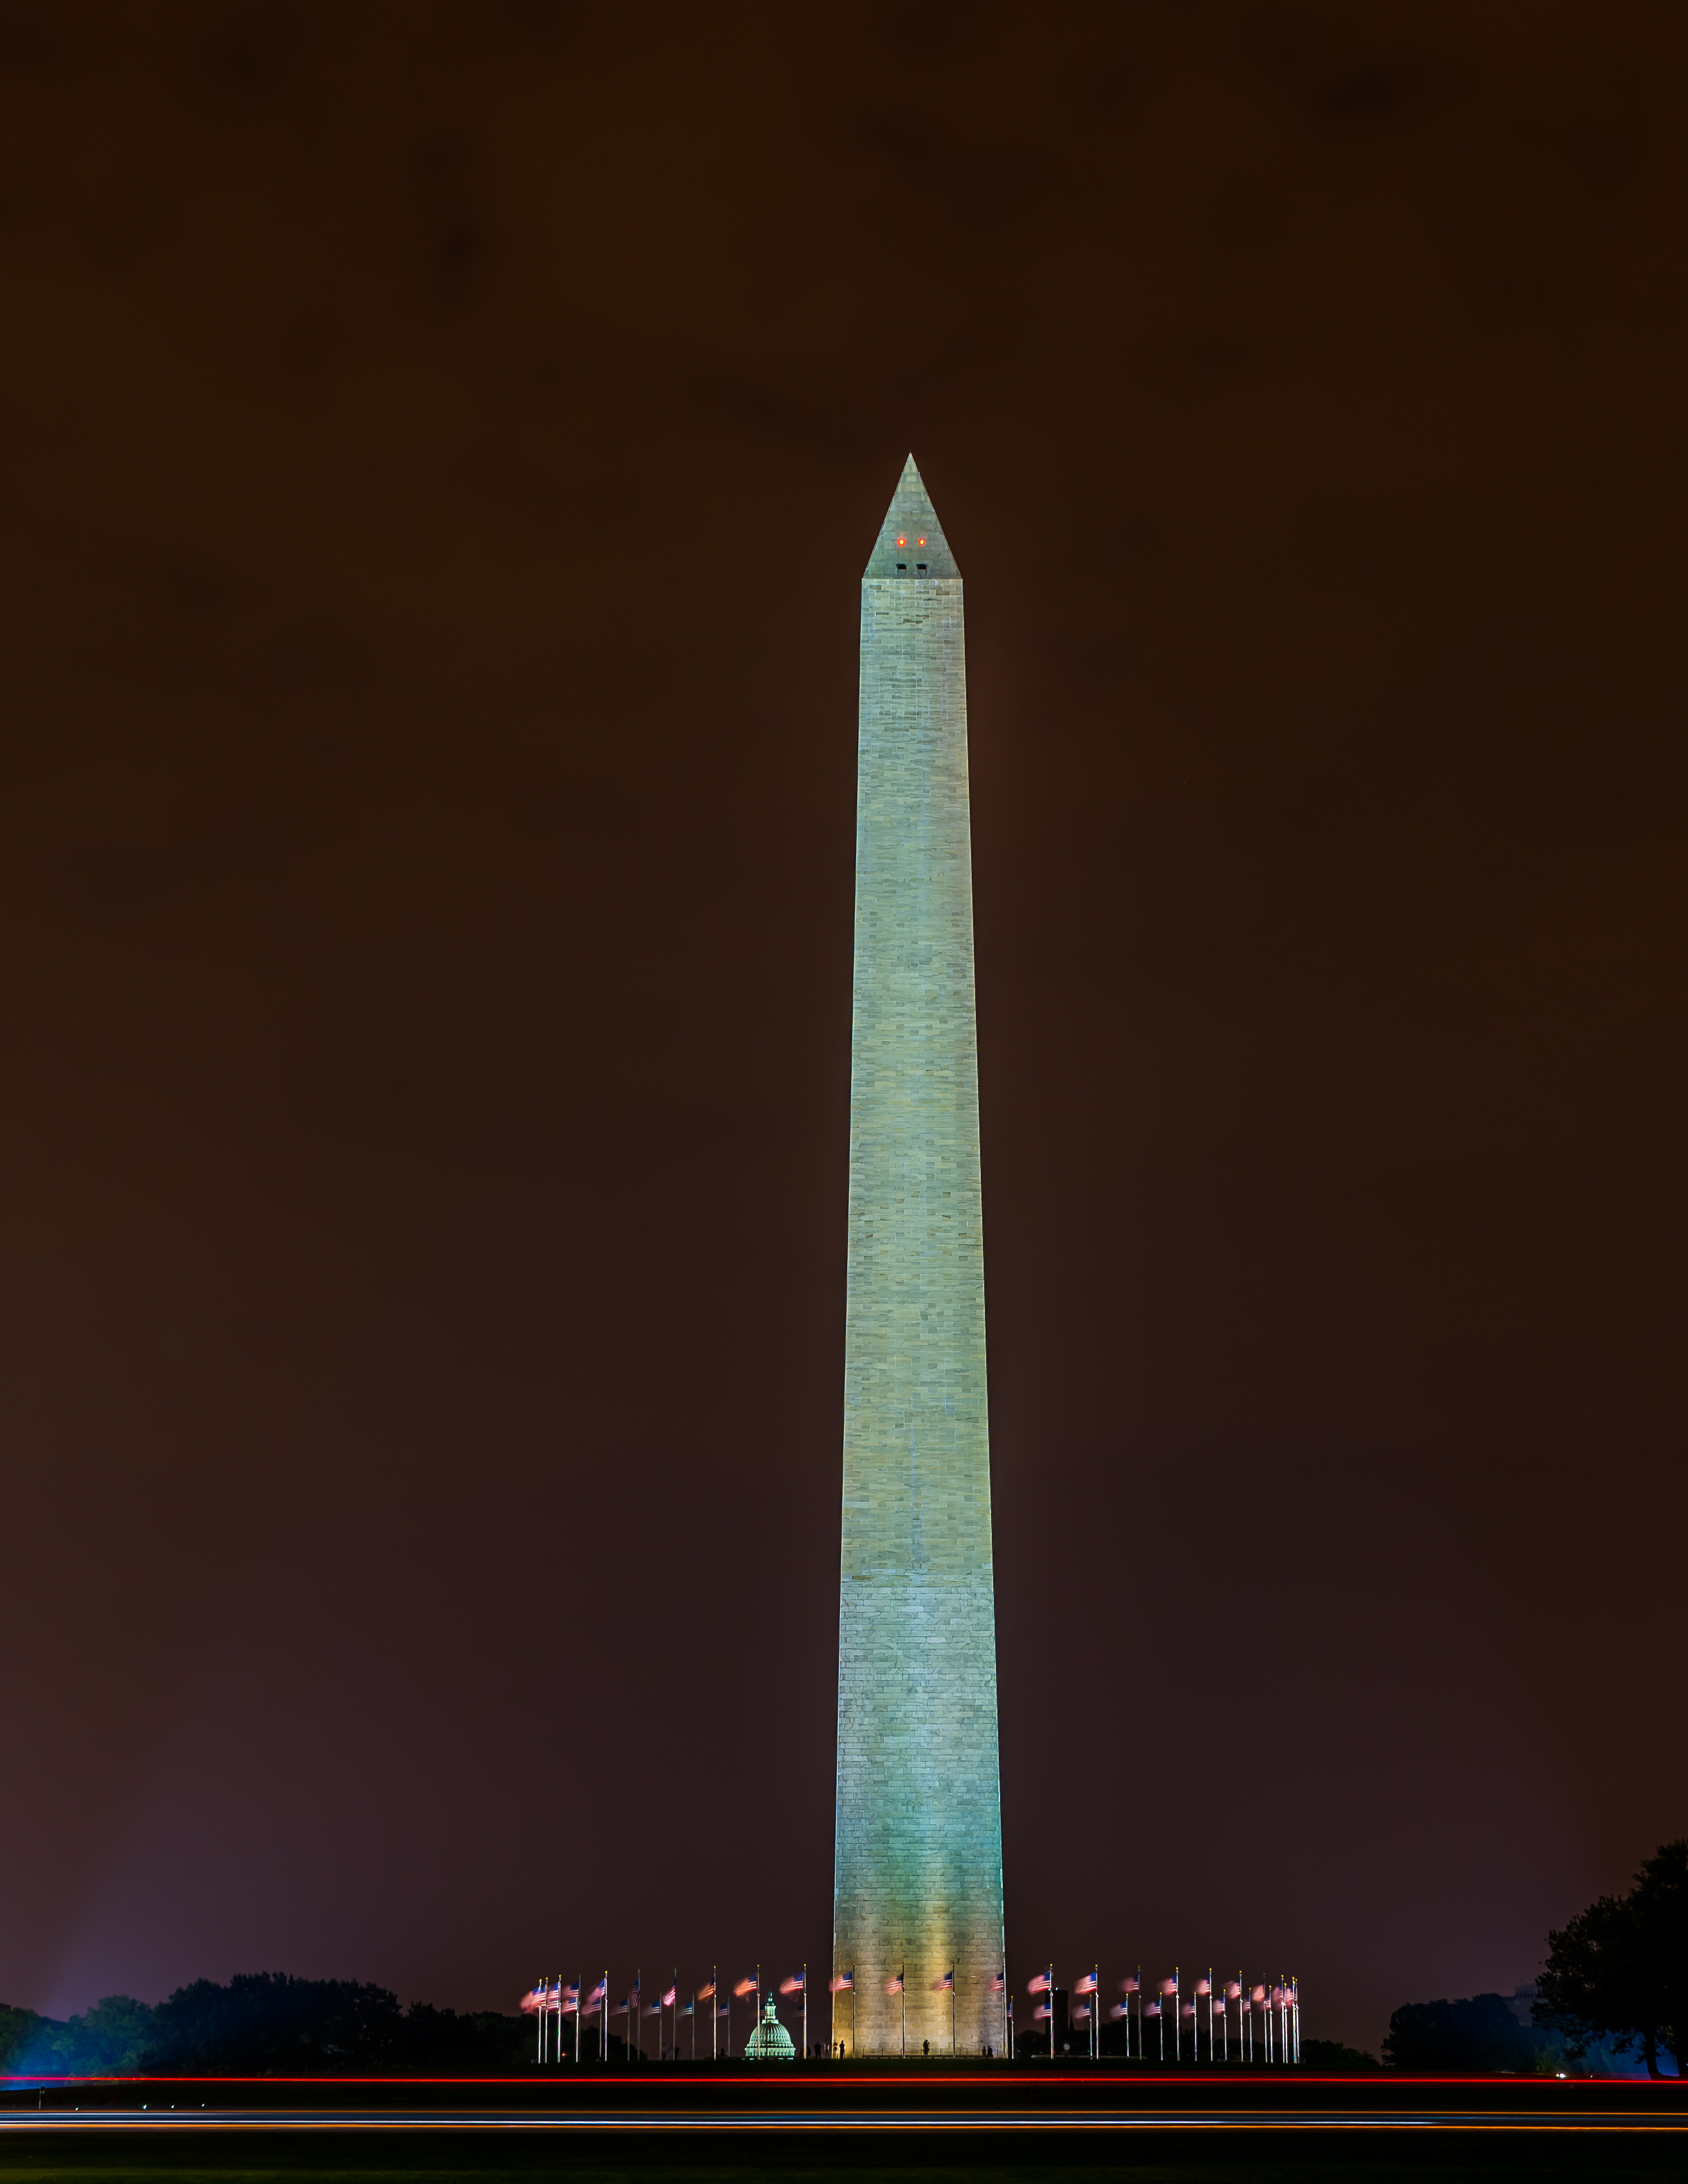 a tall monument at night with Washington Monument in the background